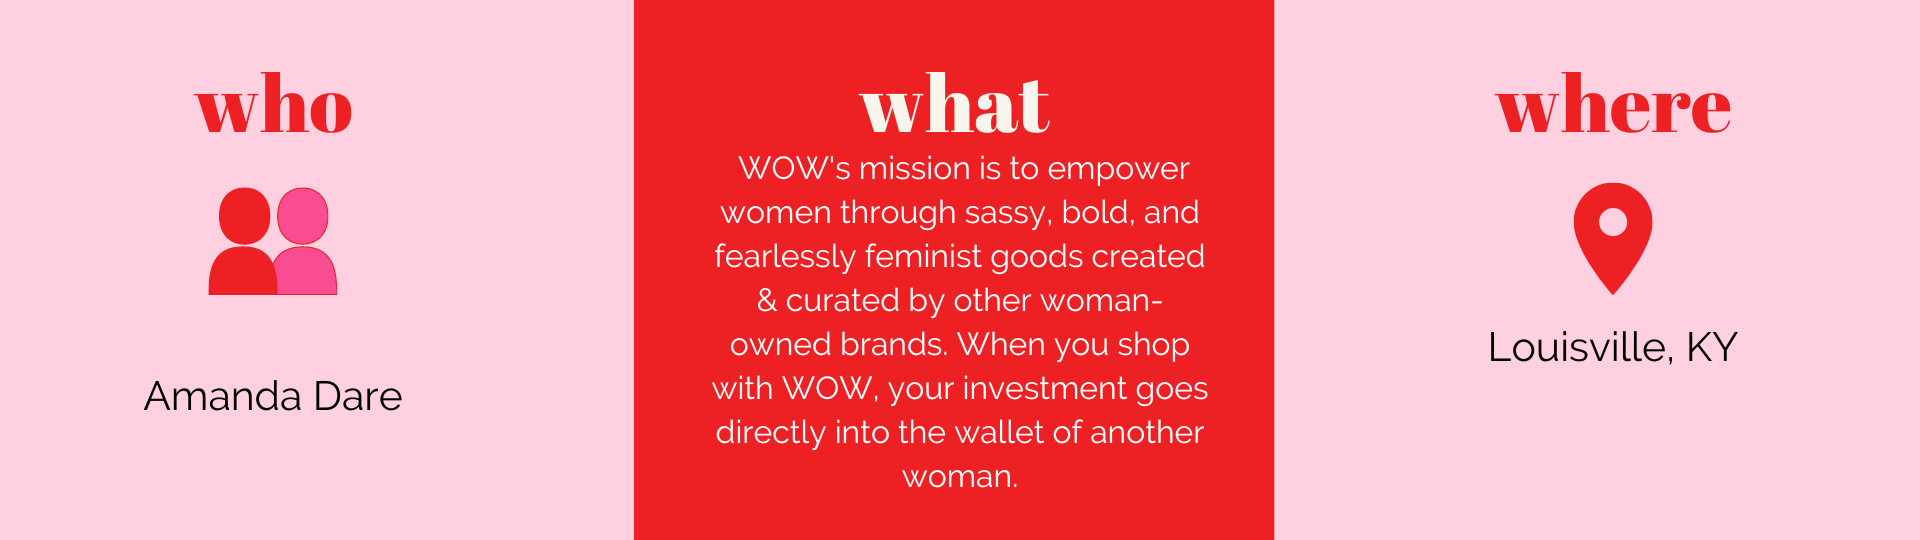 Woman-Owned Wallet